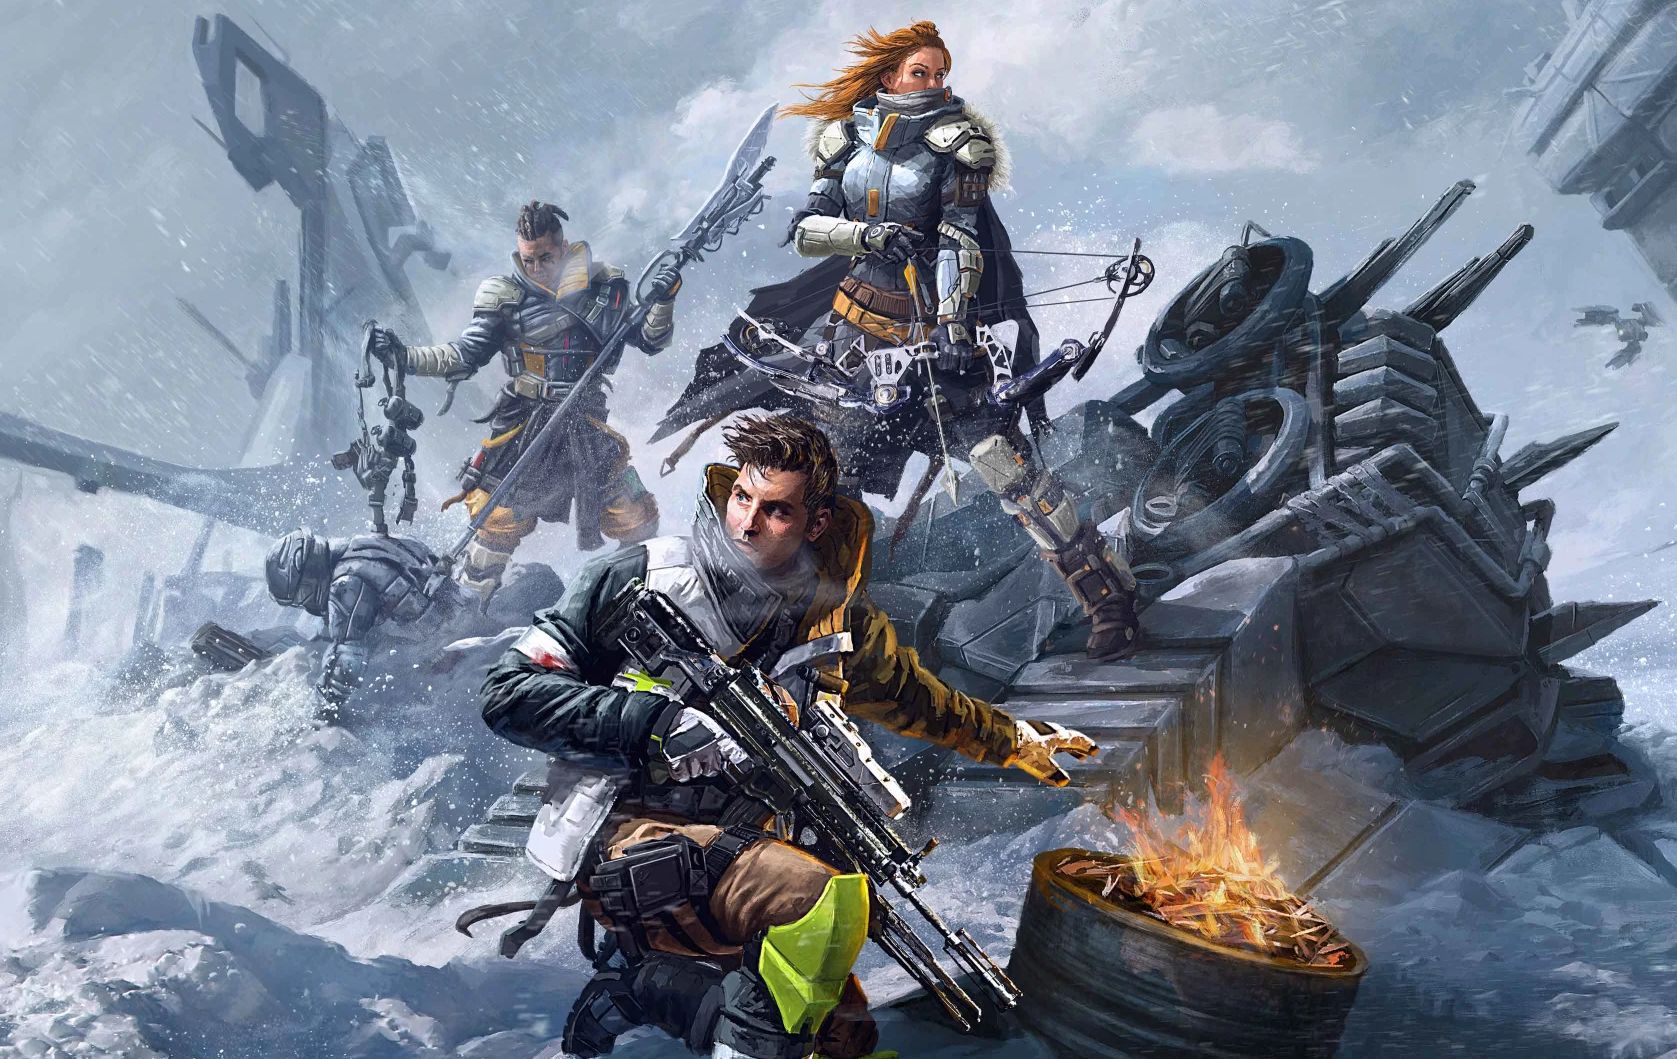 Image for PvPvE shooter Scavengers gets a new gameplay trailer and technical test